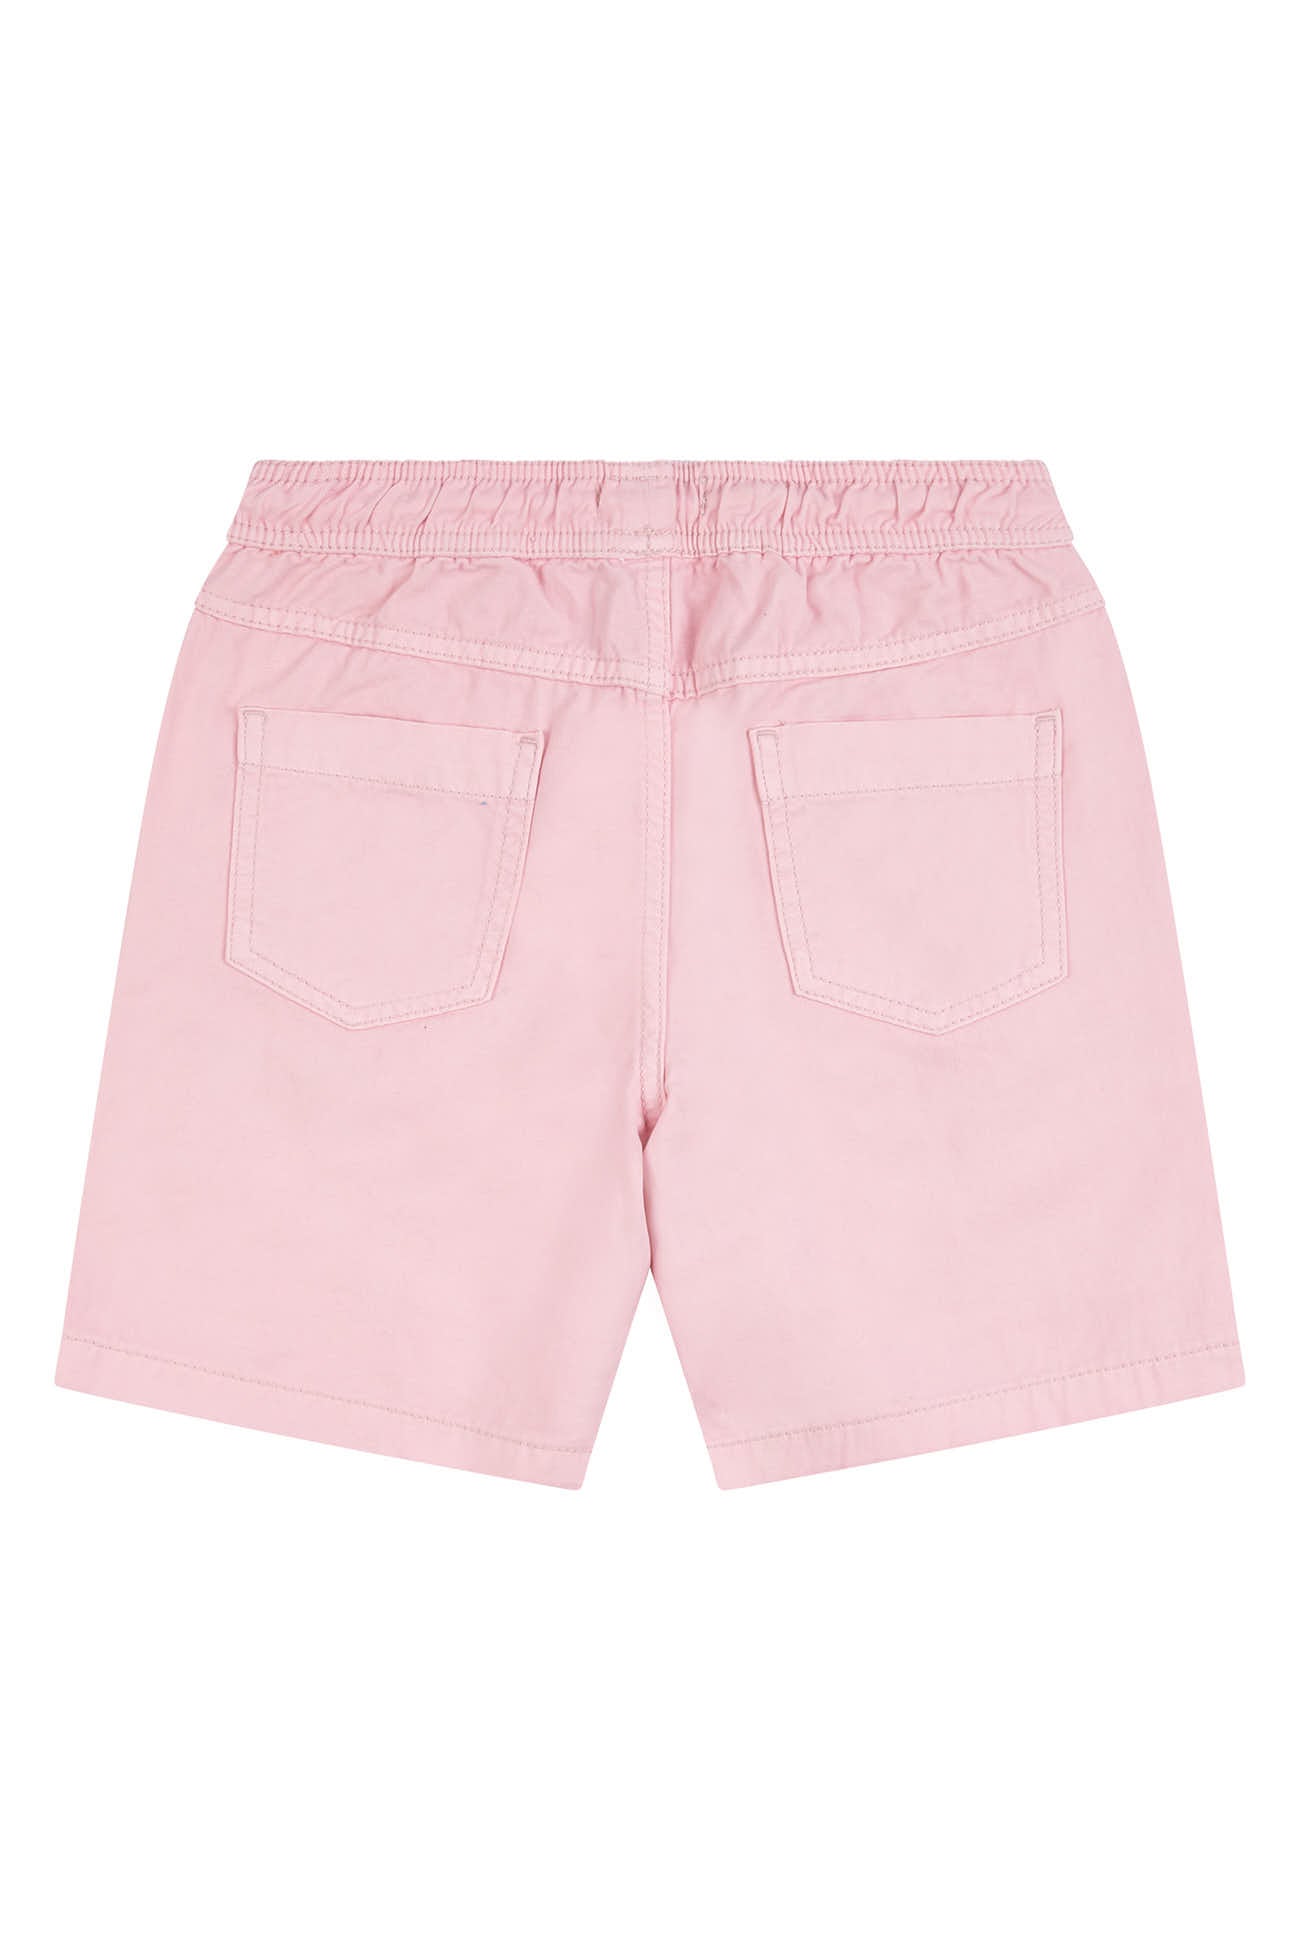 Boys Classic Shorts in Orchid Pink